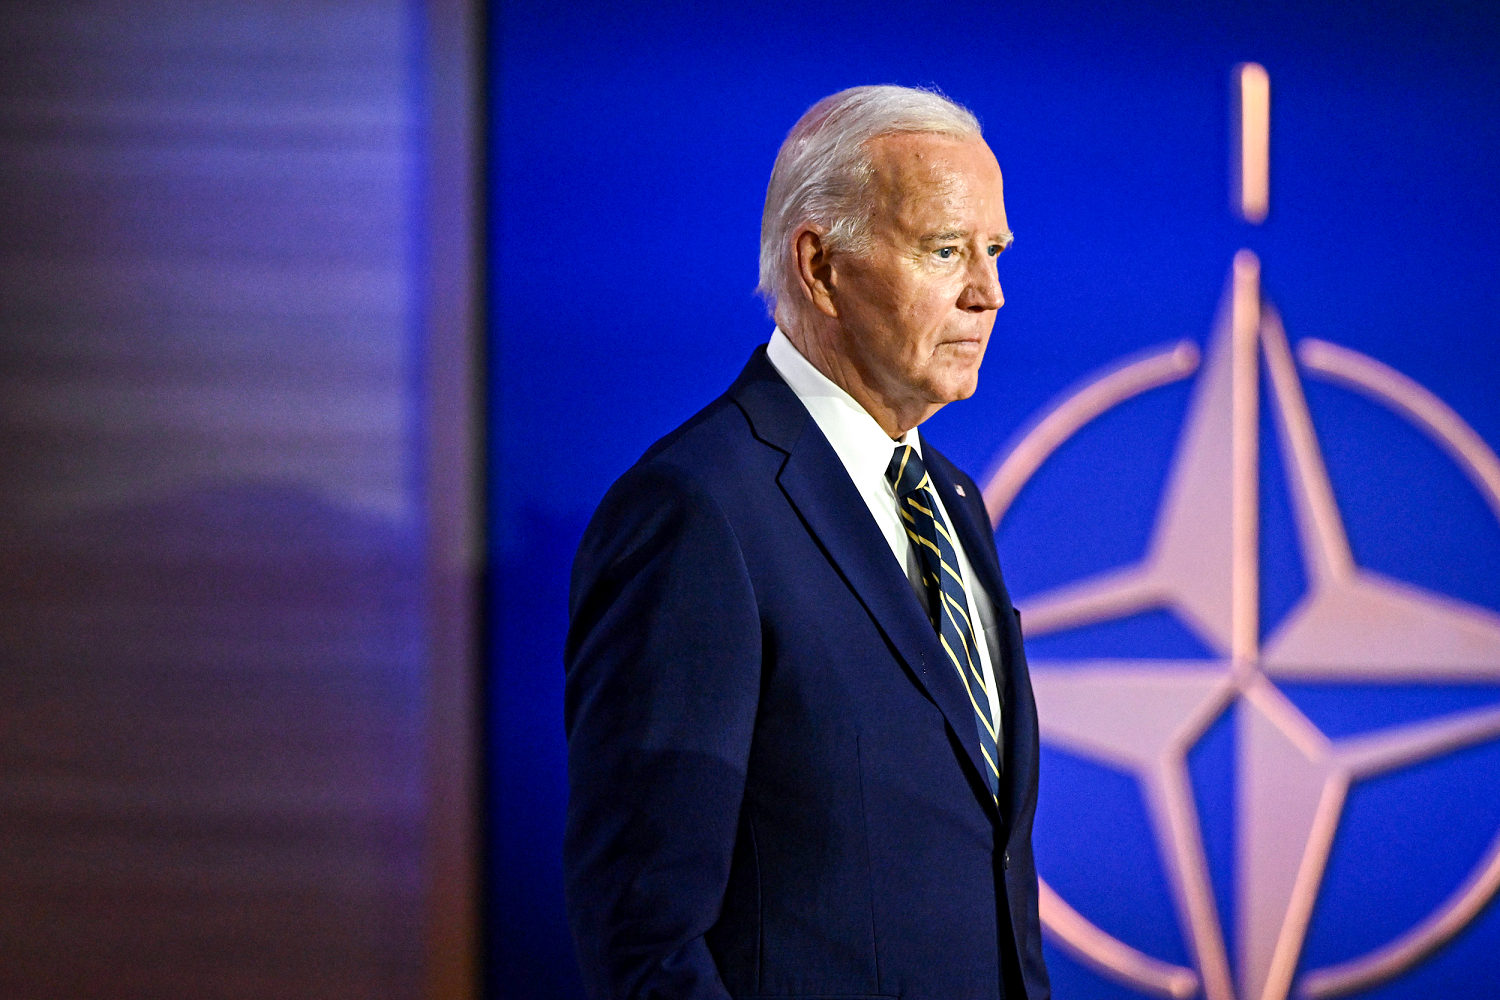 Biden insiders say 'no one' sees a path to victory: 'He will never recover'